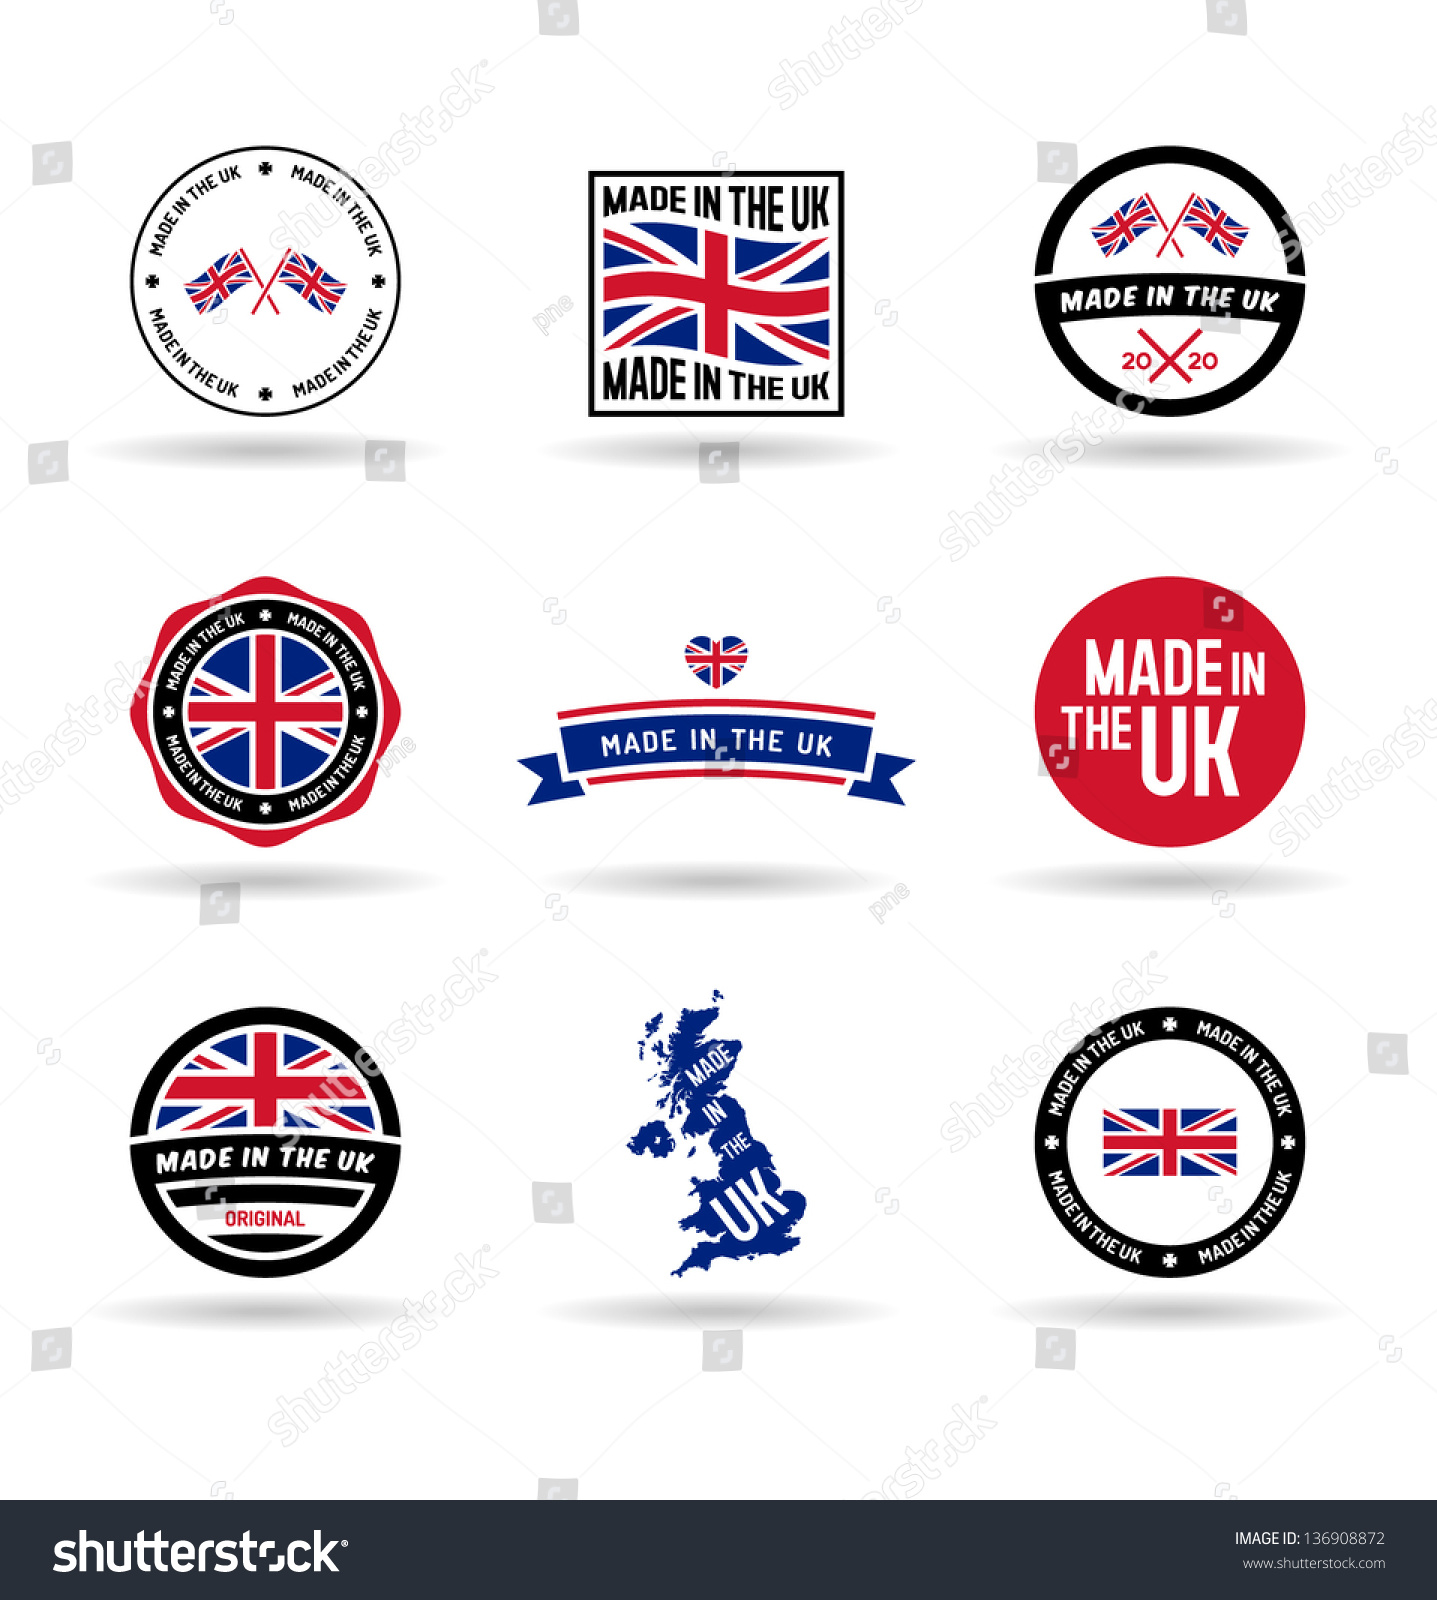 SVG of Made in the UK. Vol 1. svg